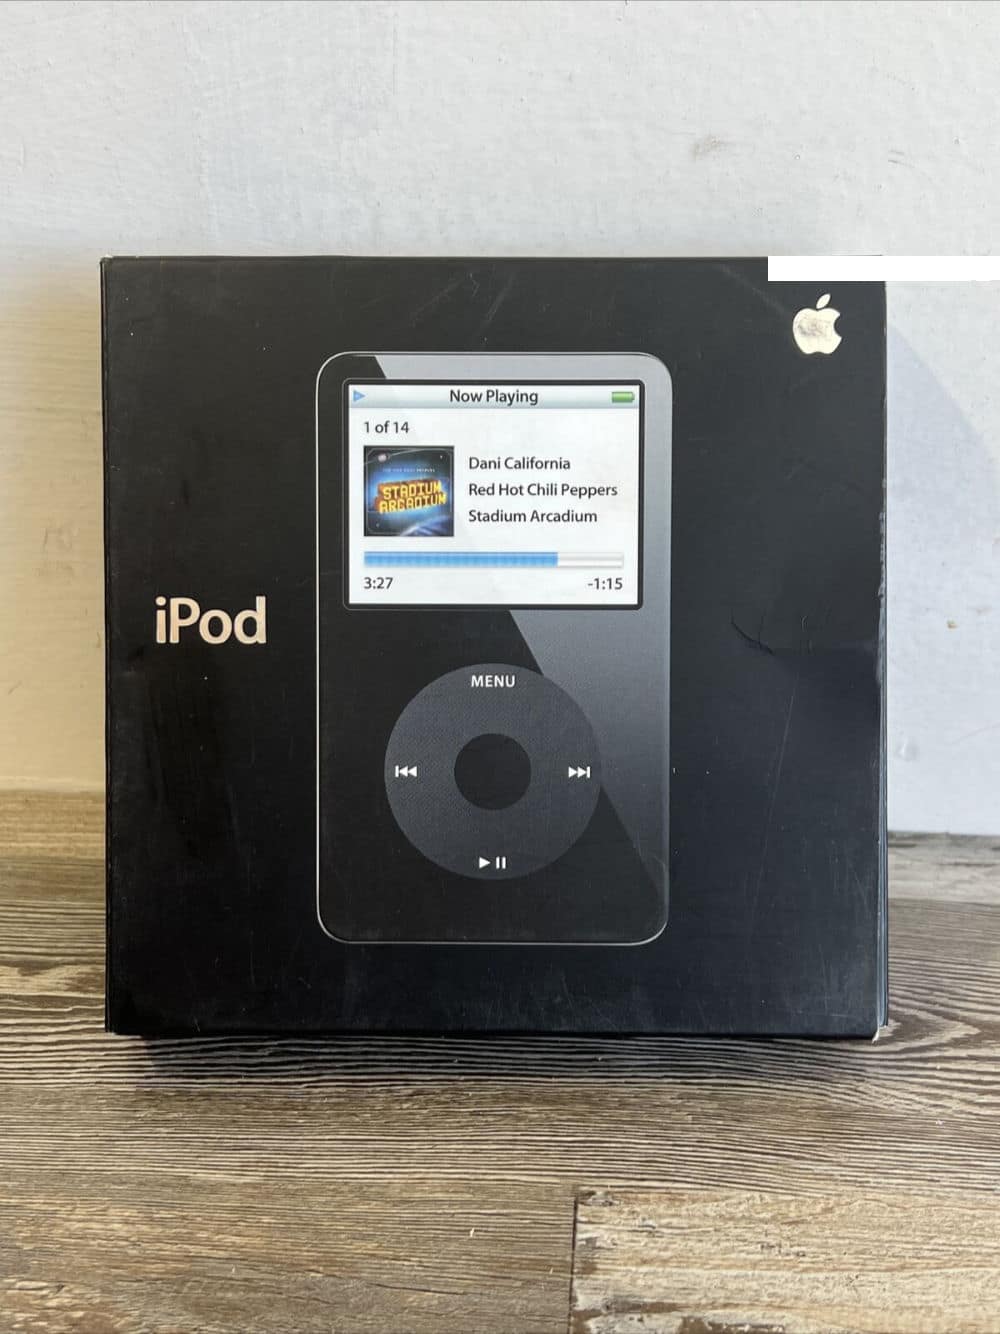 Bring your iPod Classic Video back to life in a few simple steps